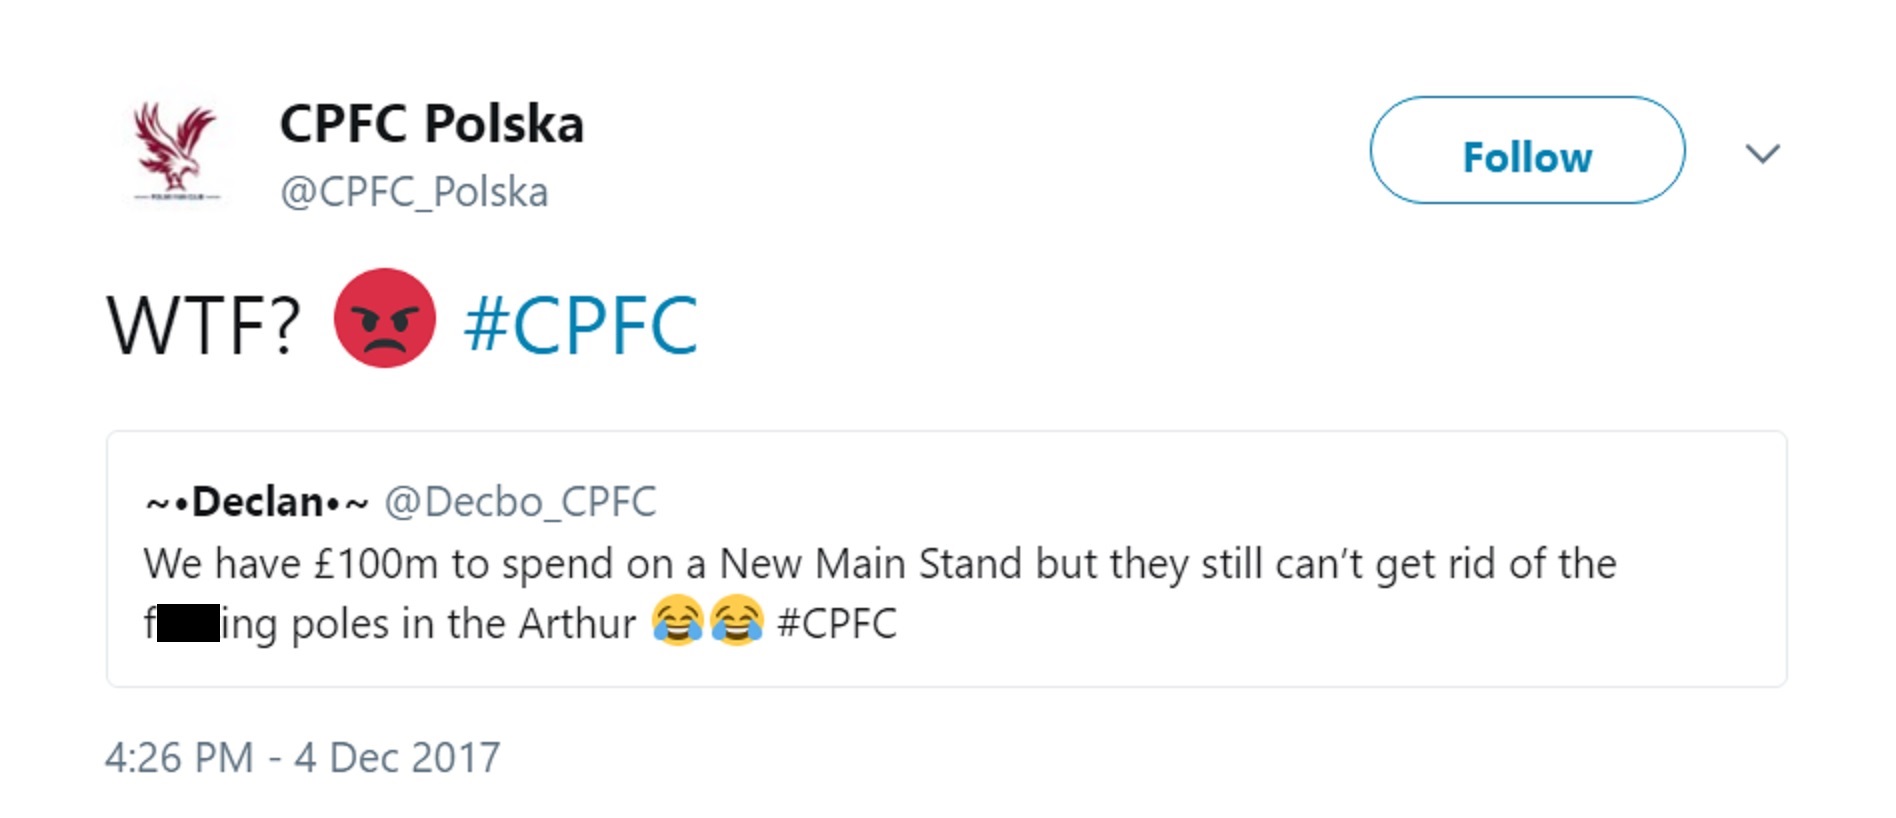 A screen grab from @CPFC_Polska's Twitter account